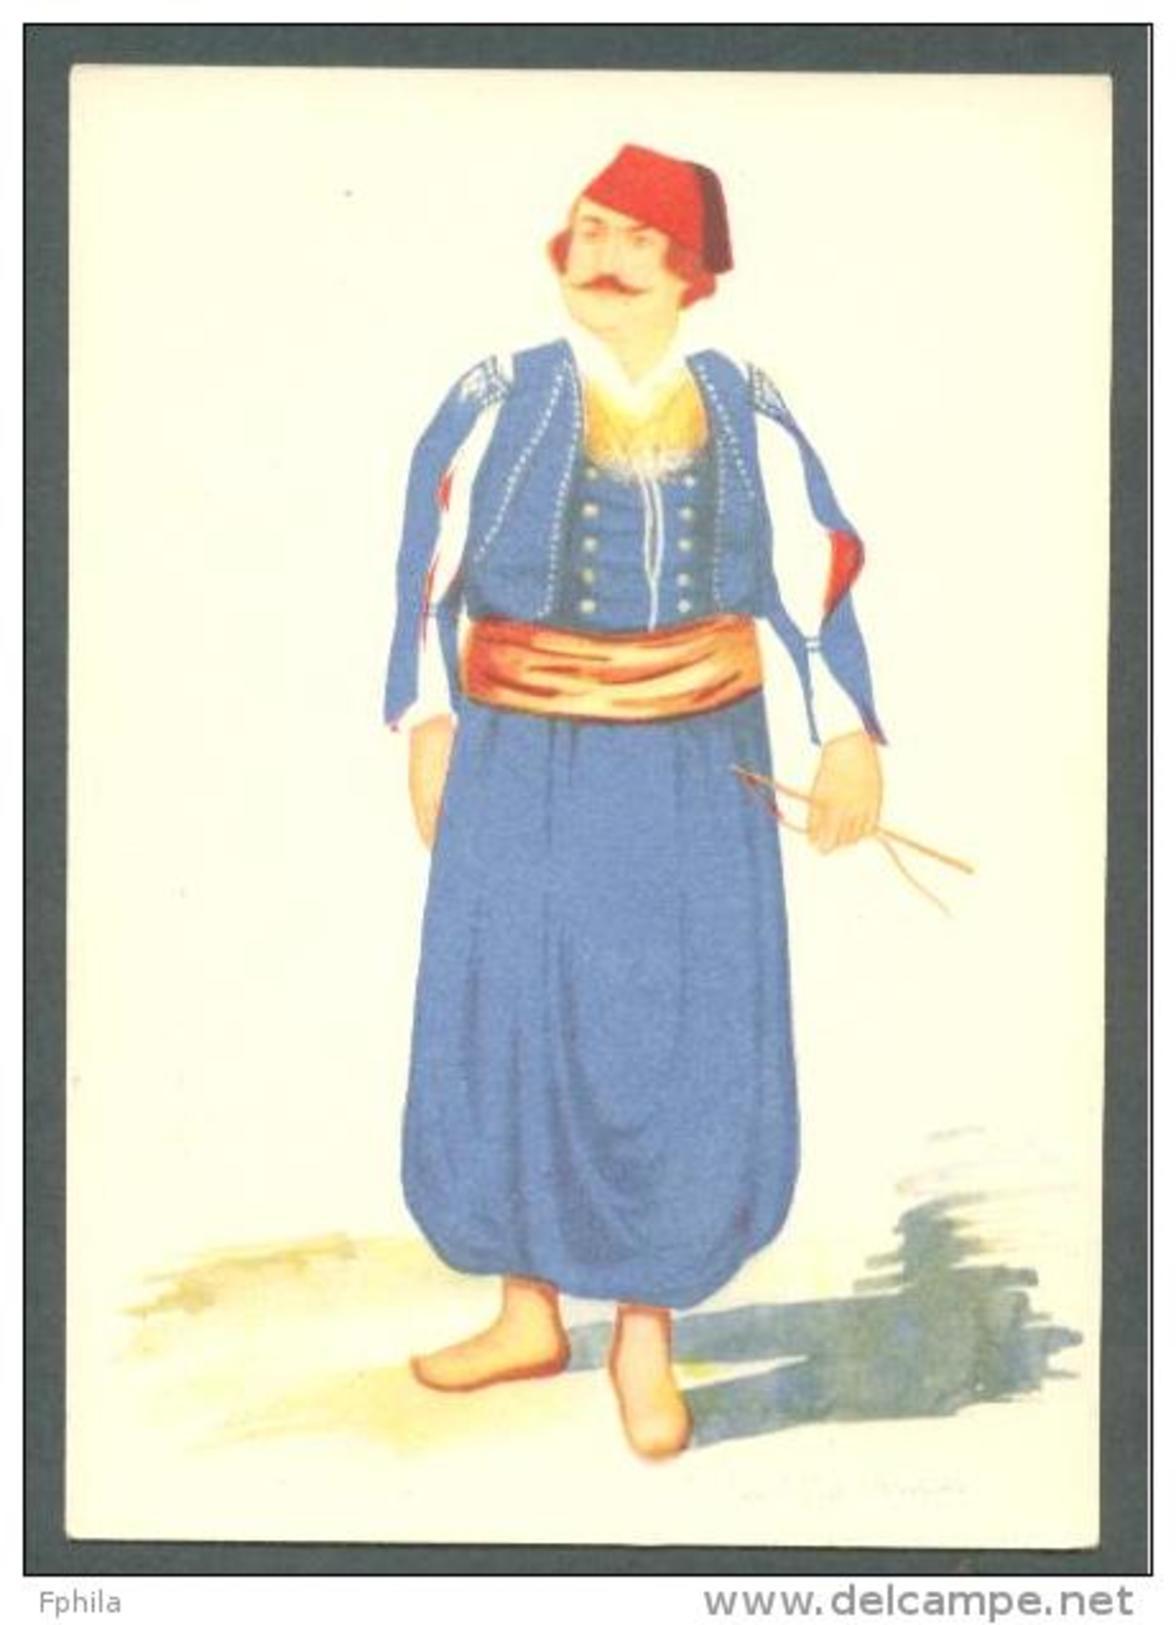 TURKEY OTTOMAN YOUNG OSMAN MAIL CARRIER - POSTMAN IN 1856 POSTCARD UNUSED - Entiers Postaux